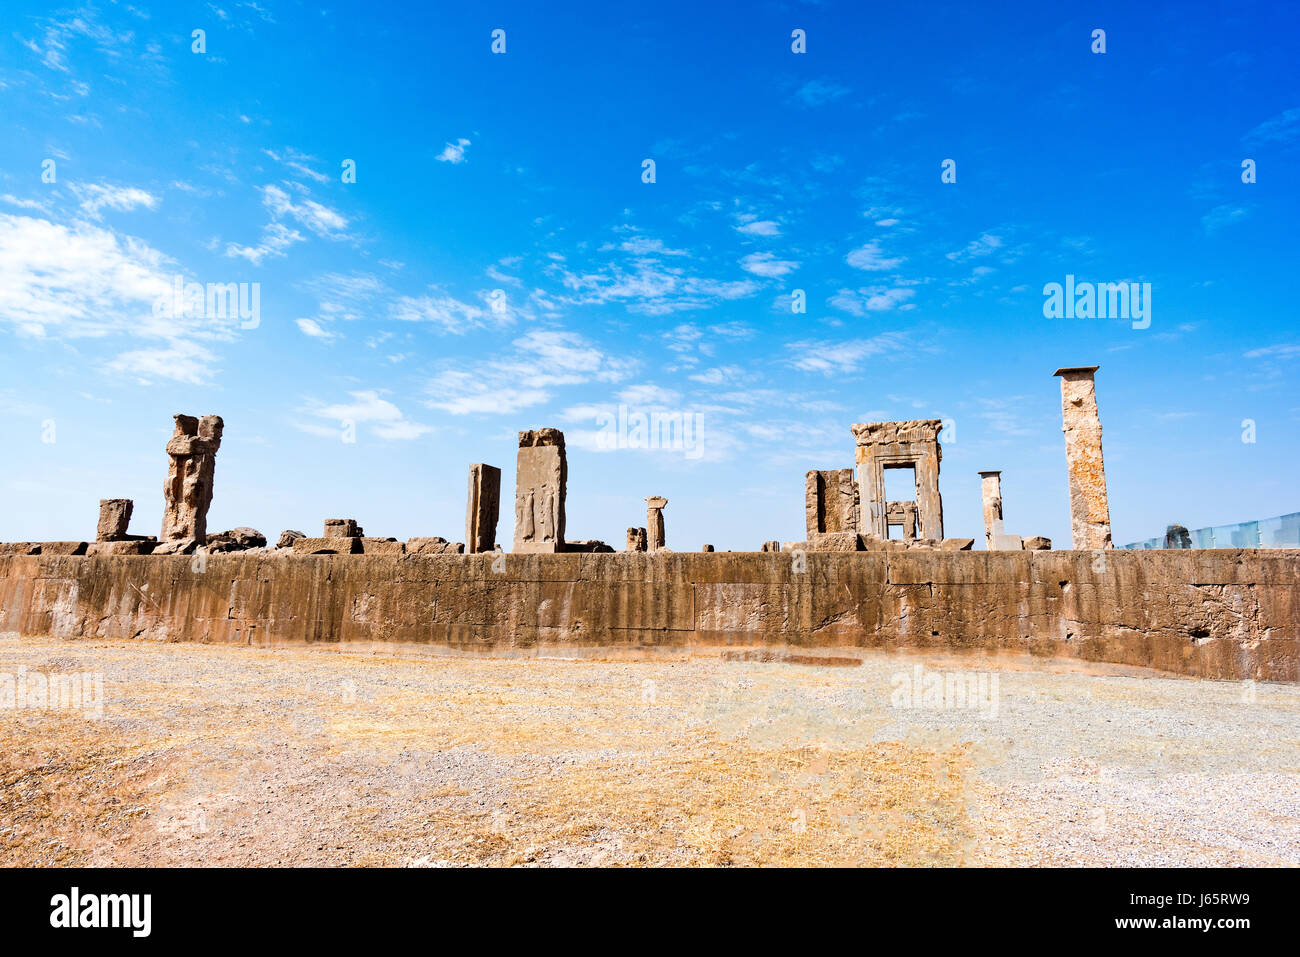 Ruins at Persepolis historical city in Shiraz, The construction of this impressive palace started by Darius I, one of Cyrus's successors, in 518 BC. Stock Photo